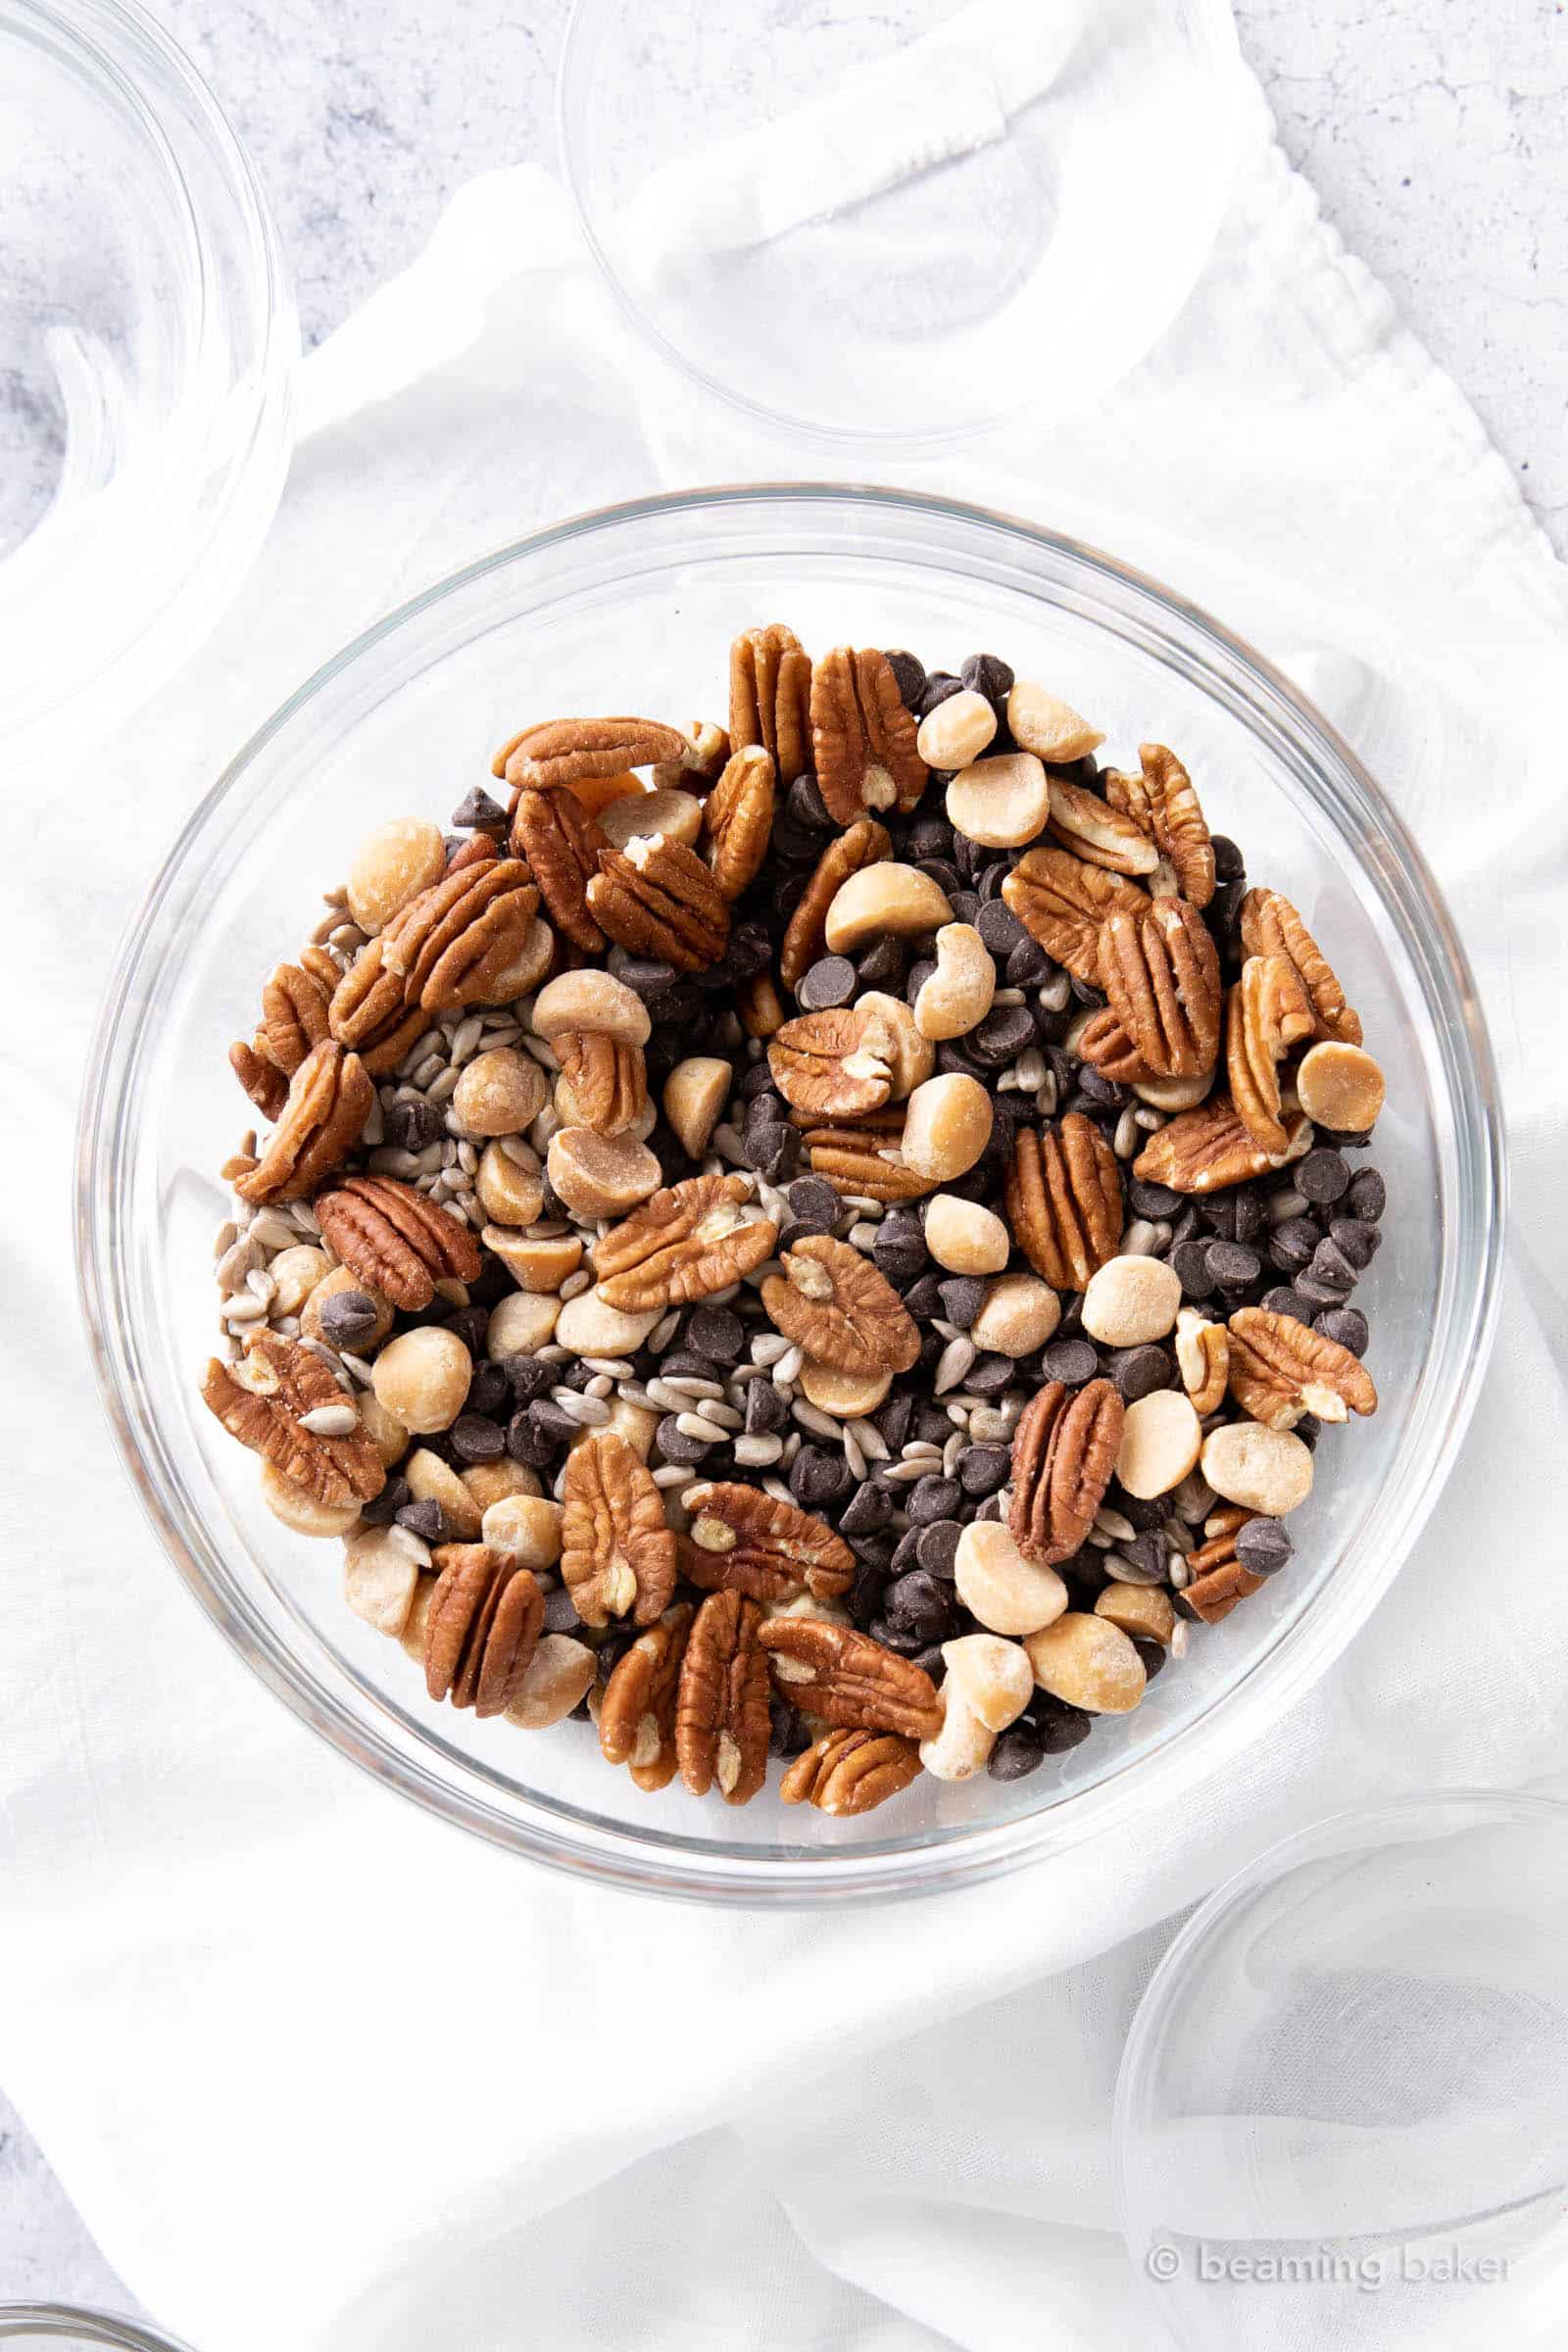 the final product of this homemade keto trail mix recipe